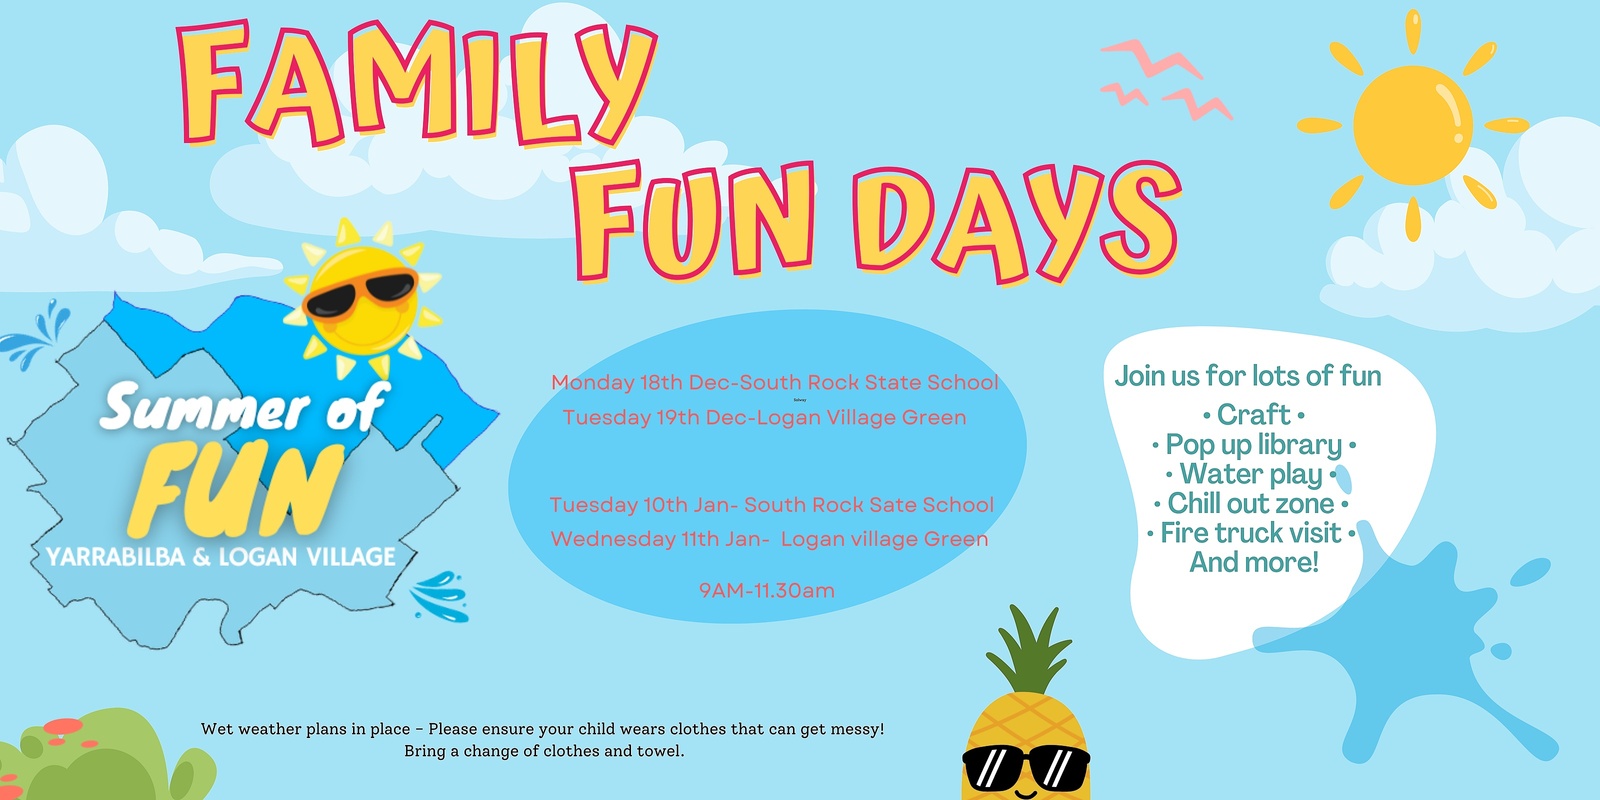 Banner image for Family Fun Day South Rock State School - December 18th